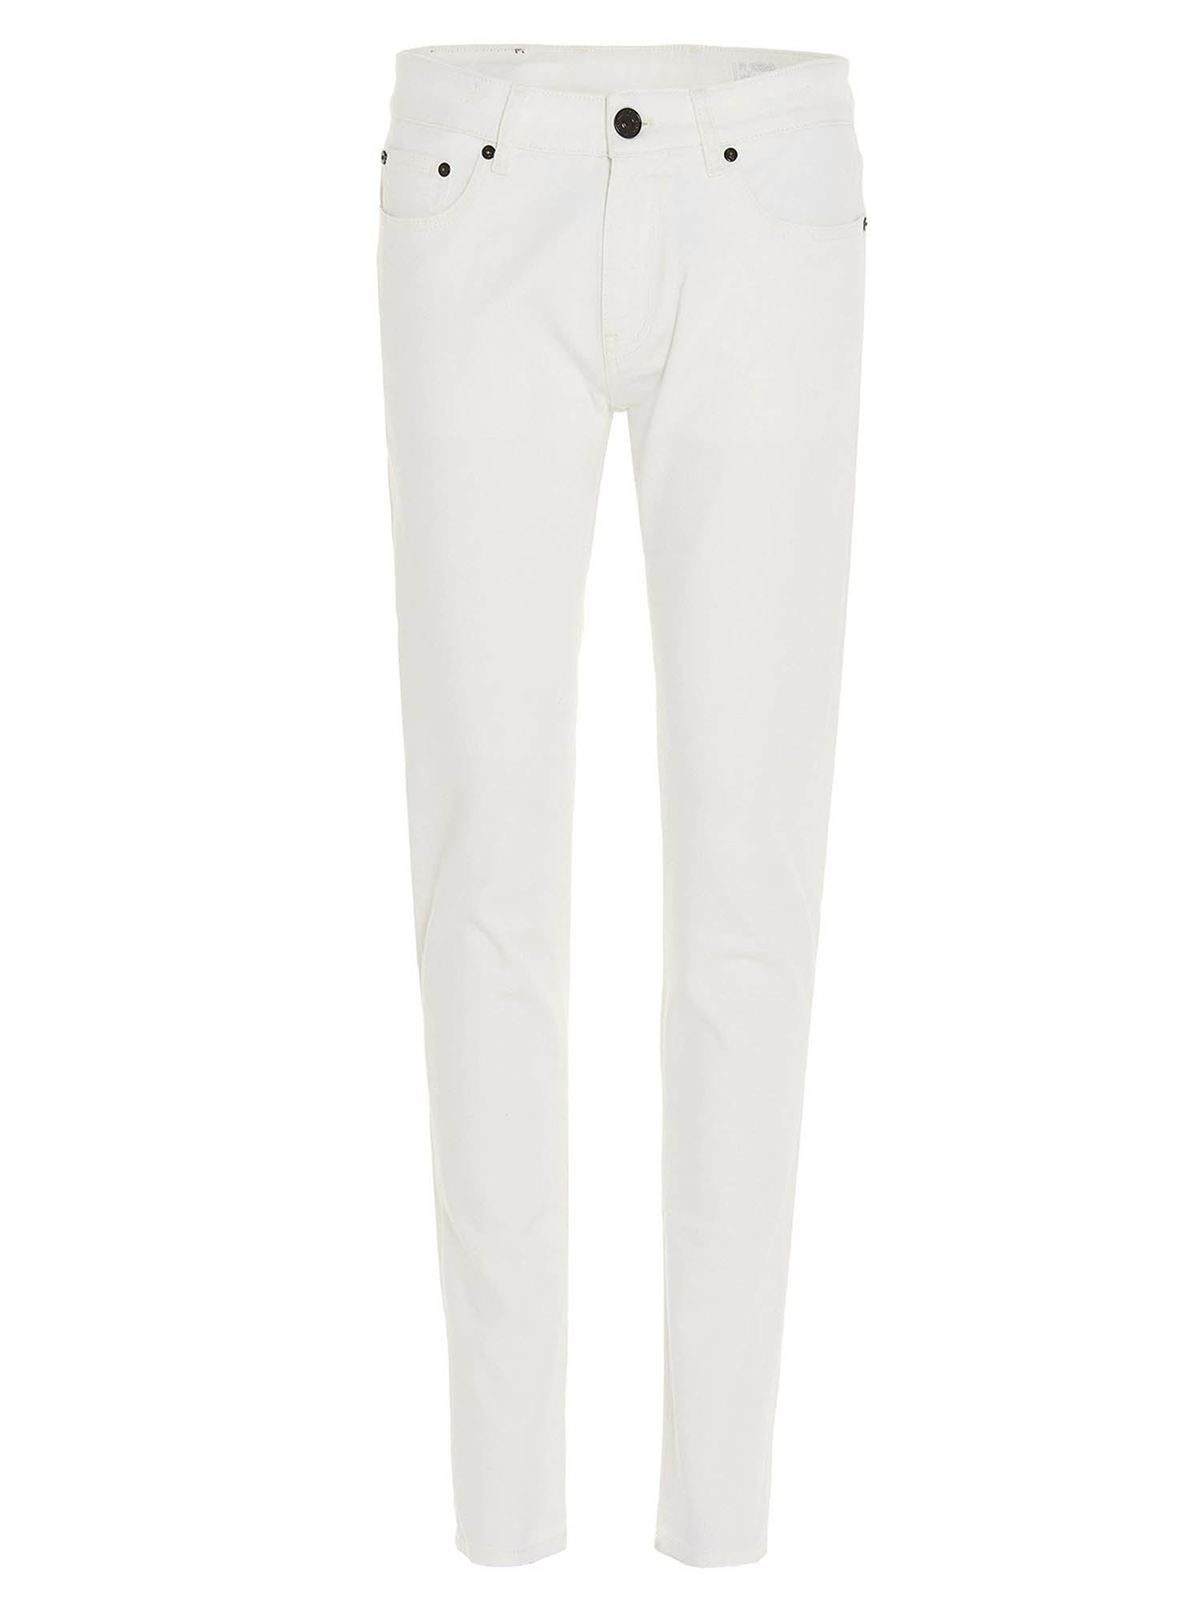 Shop Pt Torino Must Rock Jeans In White